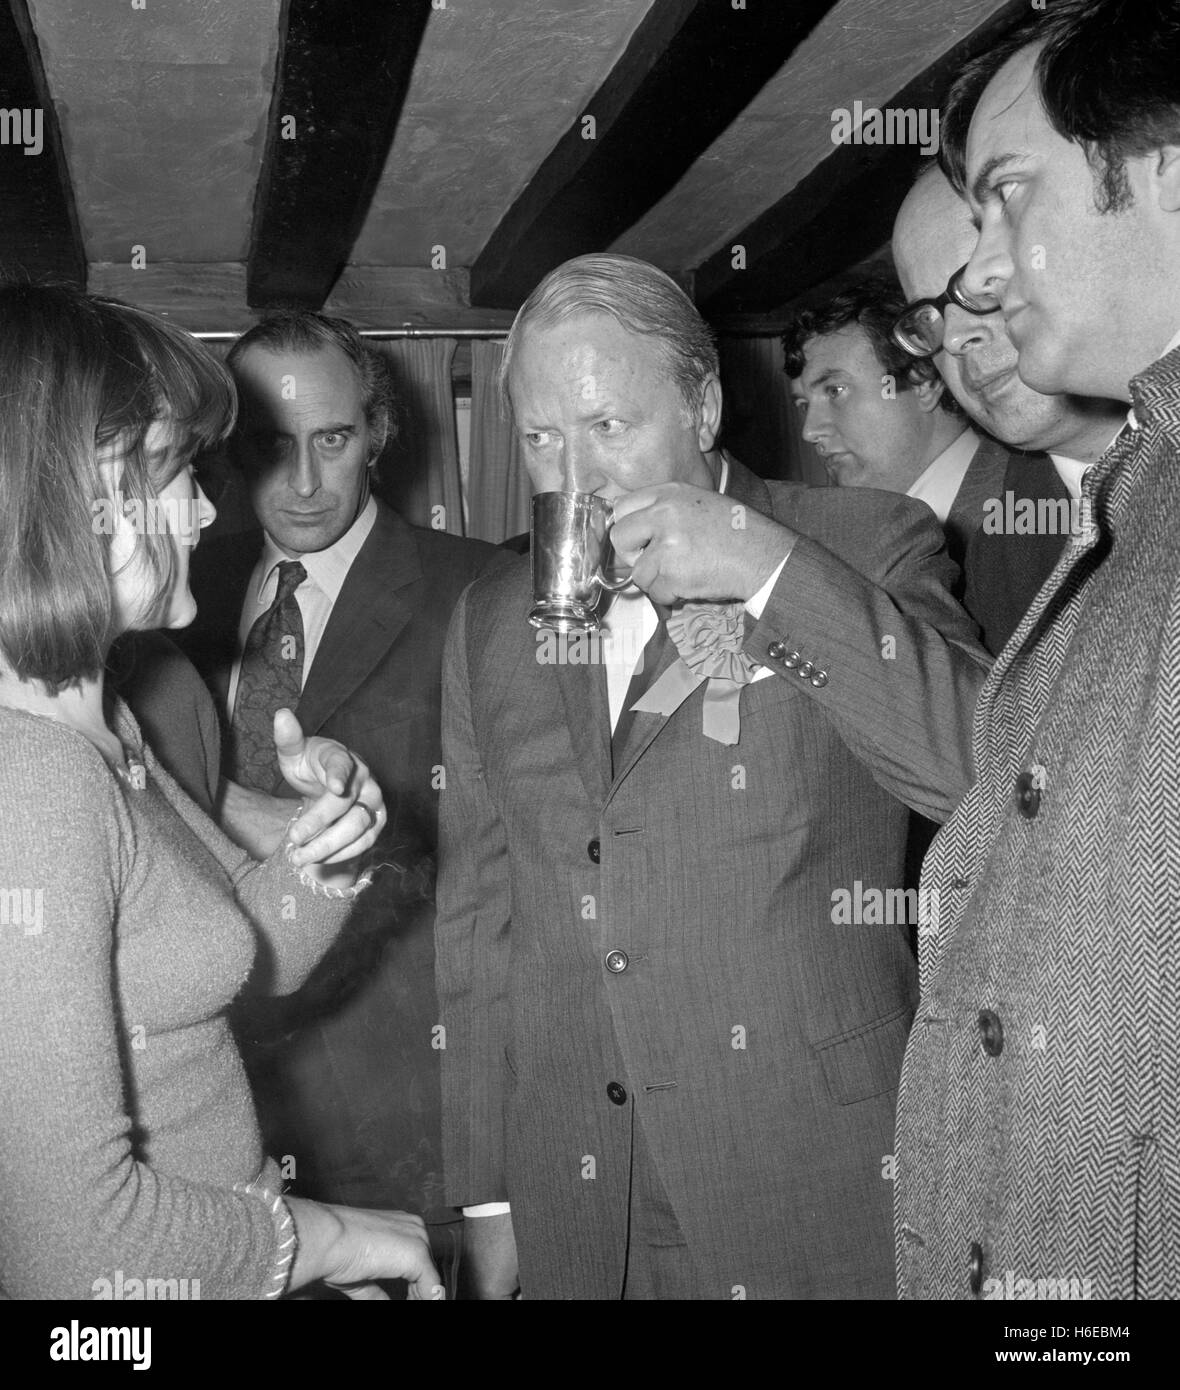 Prime Minister Edward Heath talks to Susan Bannon at the King's Head public house in Bexley. Earlier Mr Heath had attended his Adoption meeting at Chislehurst and Sidcup Boys Grammar School in Hurst Road, Sidcup.PA AF 165380-21 Stock Photo